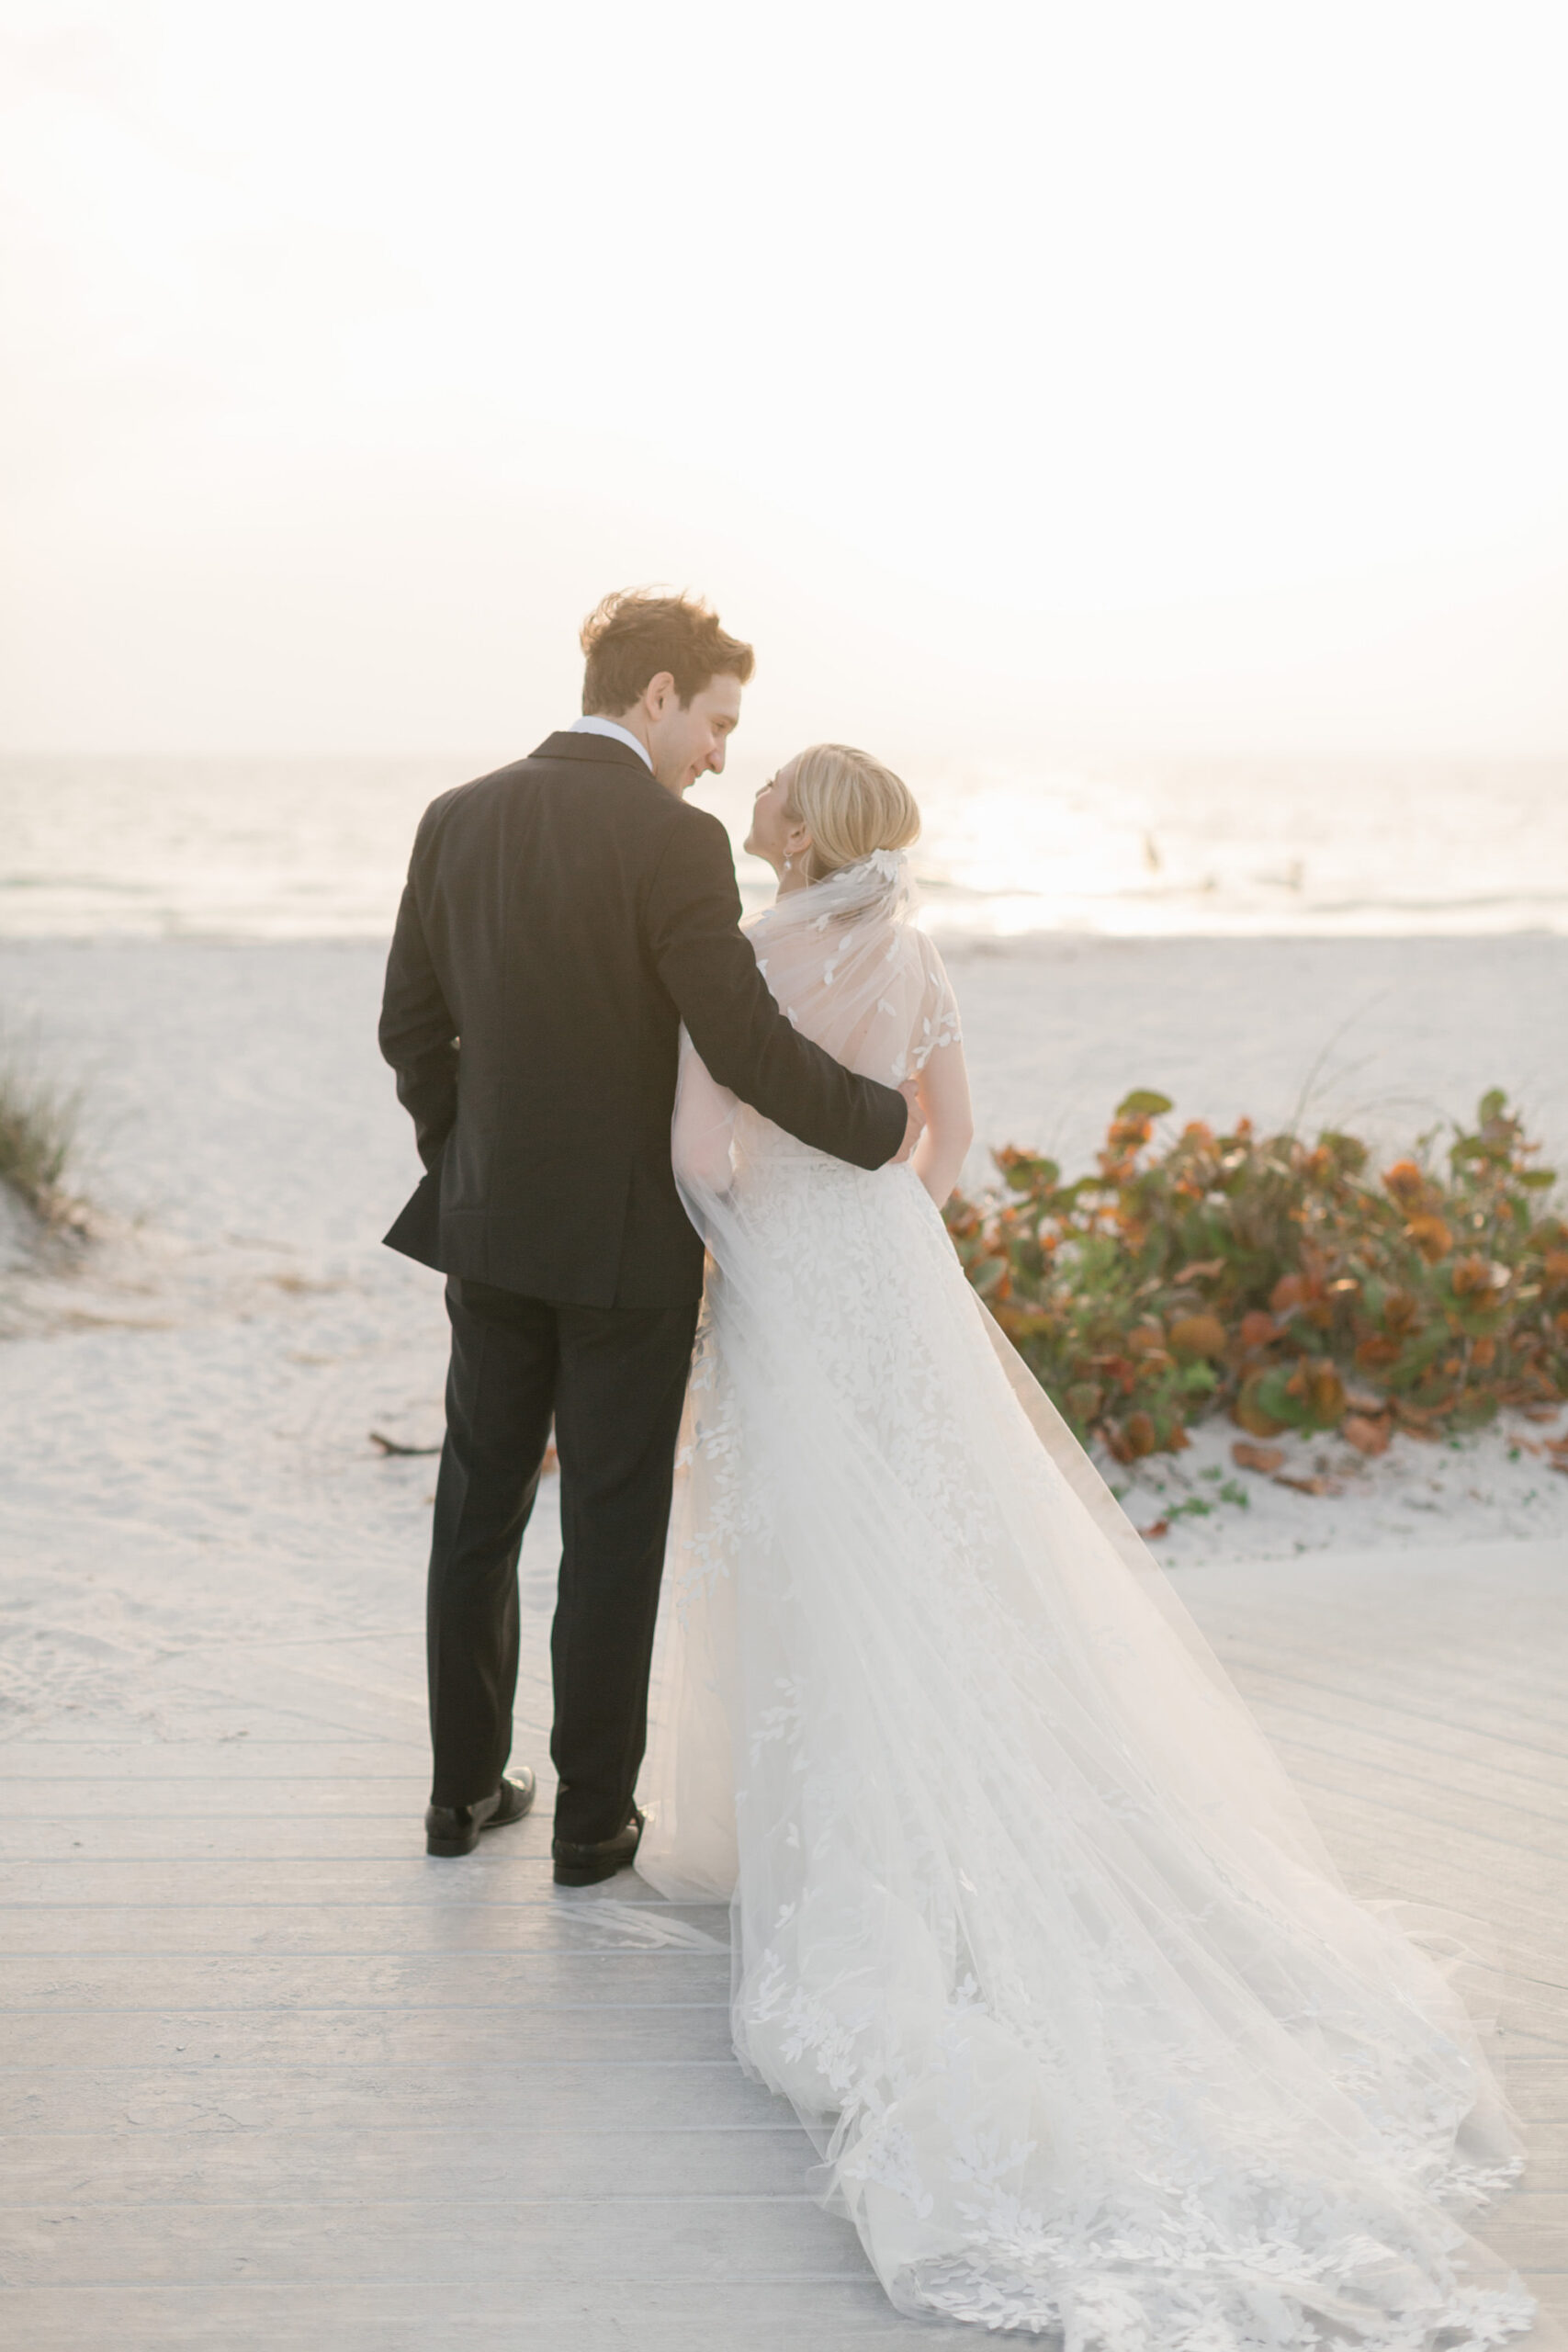 Bride and Groom Just Married Sunset Wedding Portrait | Tampa Bay Planner Parties A La Carte